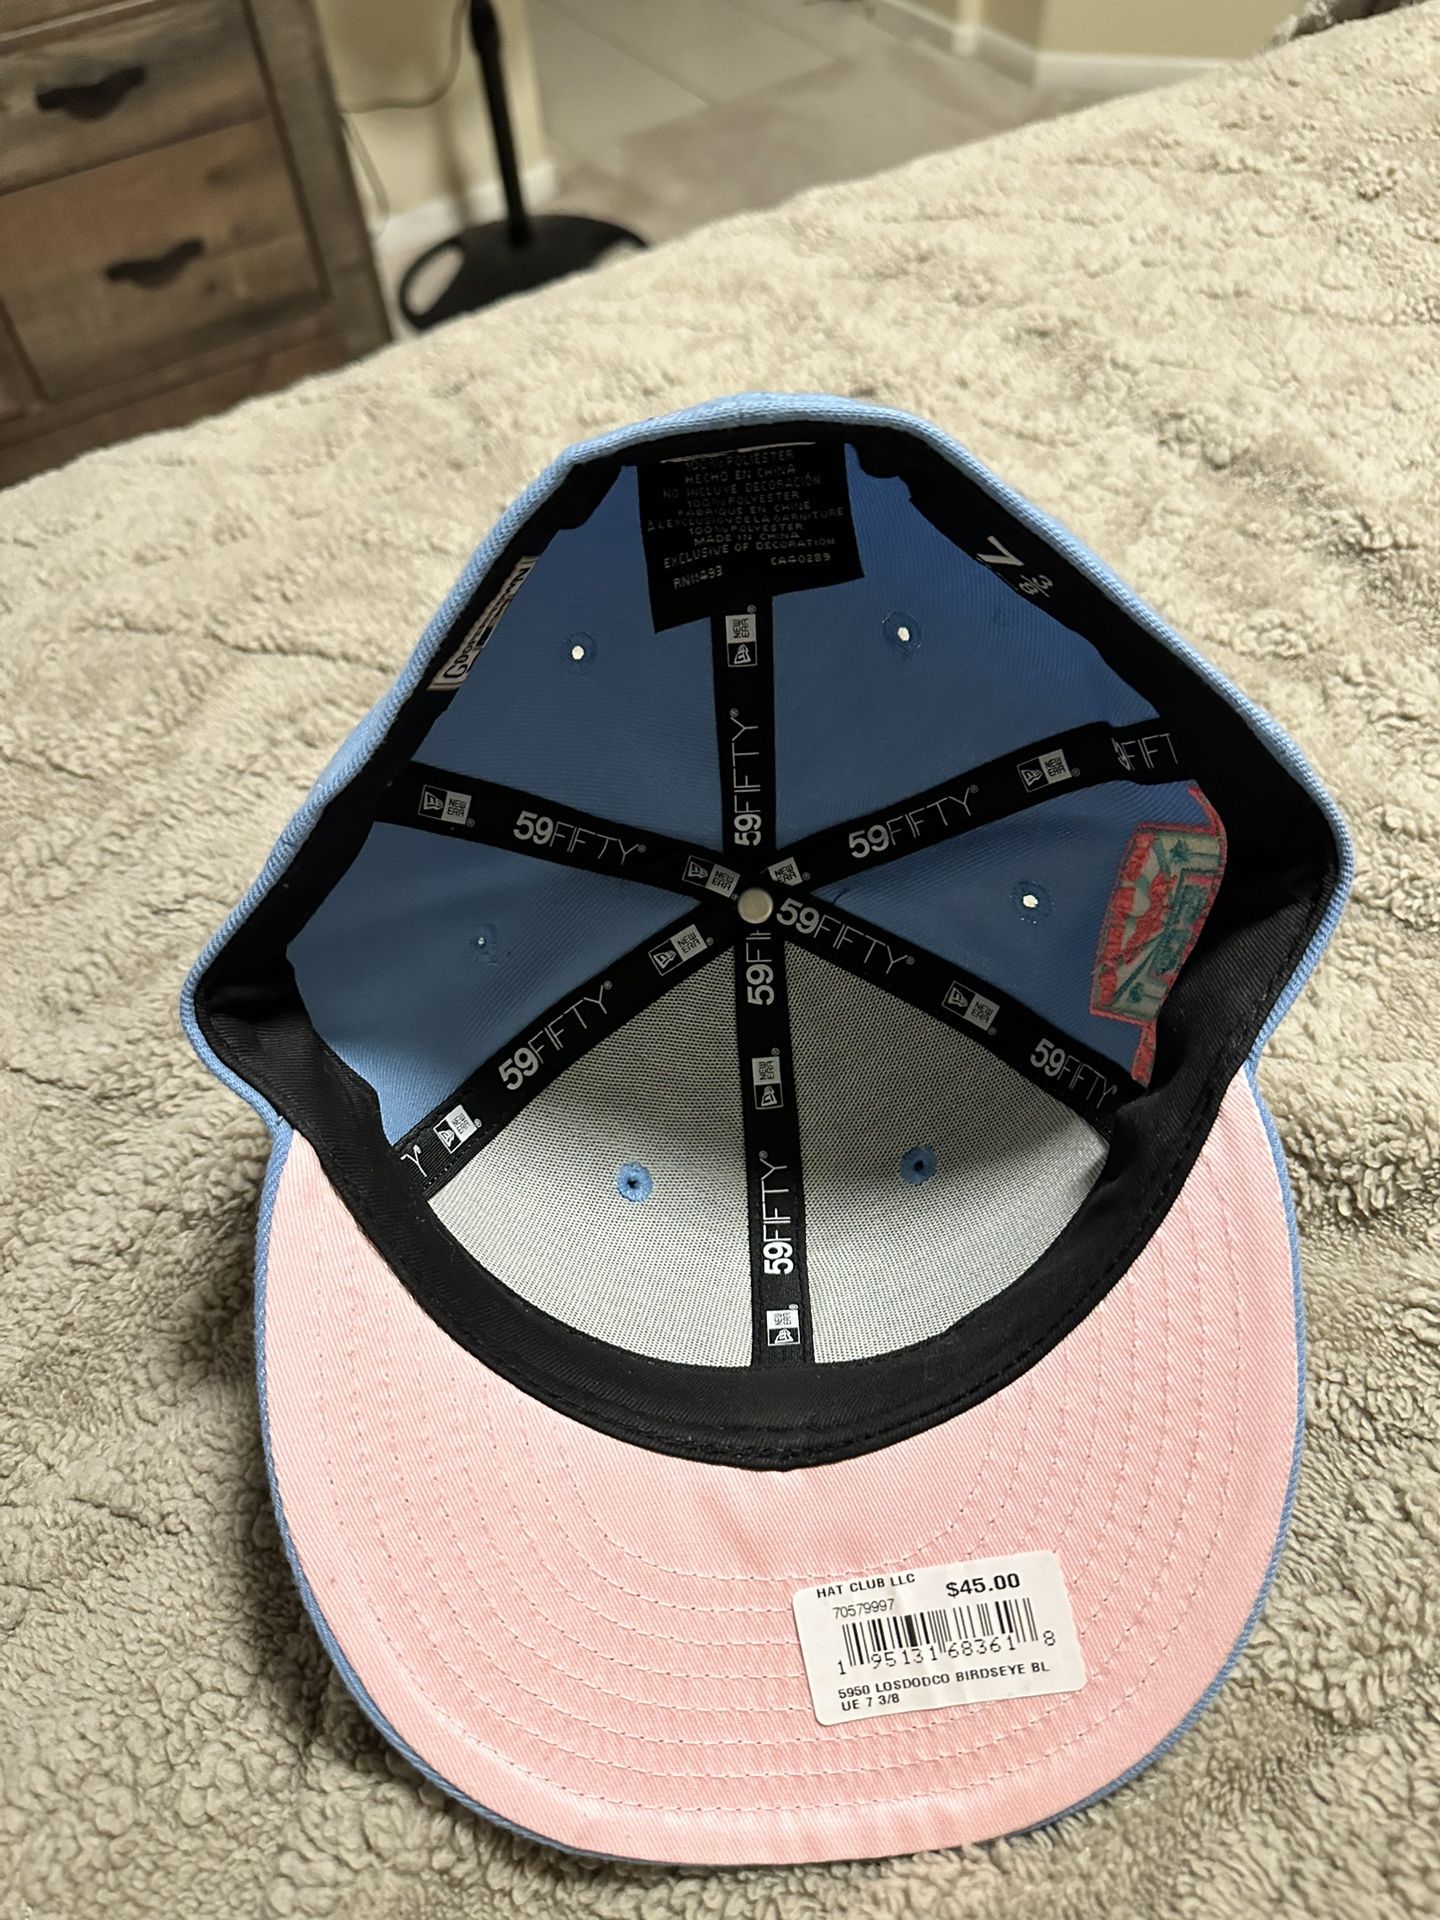 Hat Club Exclusive Unboxing and Review Cotton Candy Yankees Dodgers Angels  Braves New Era 5950 